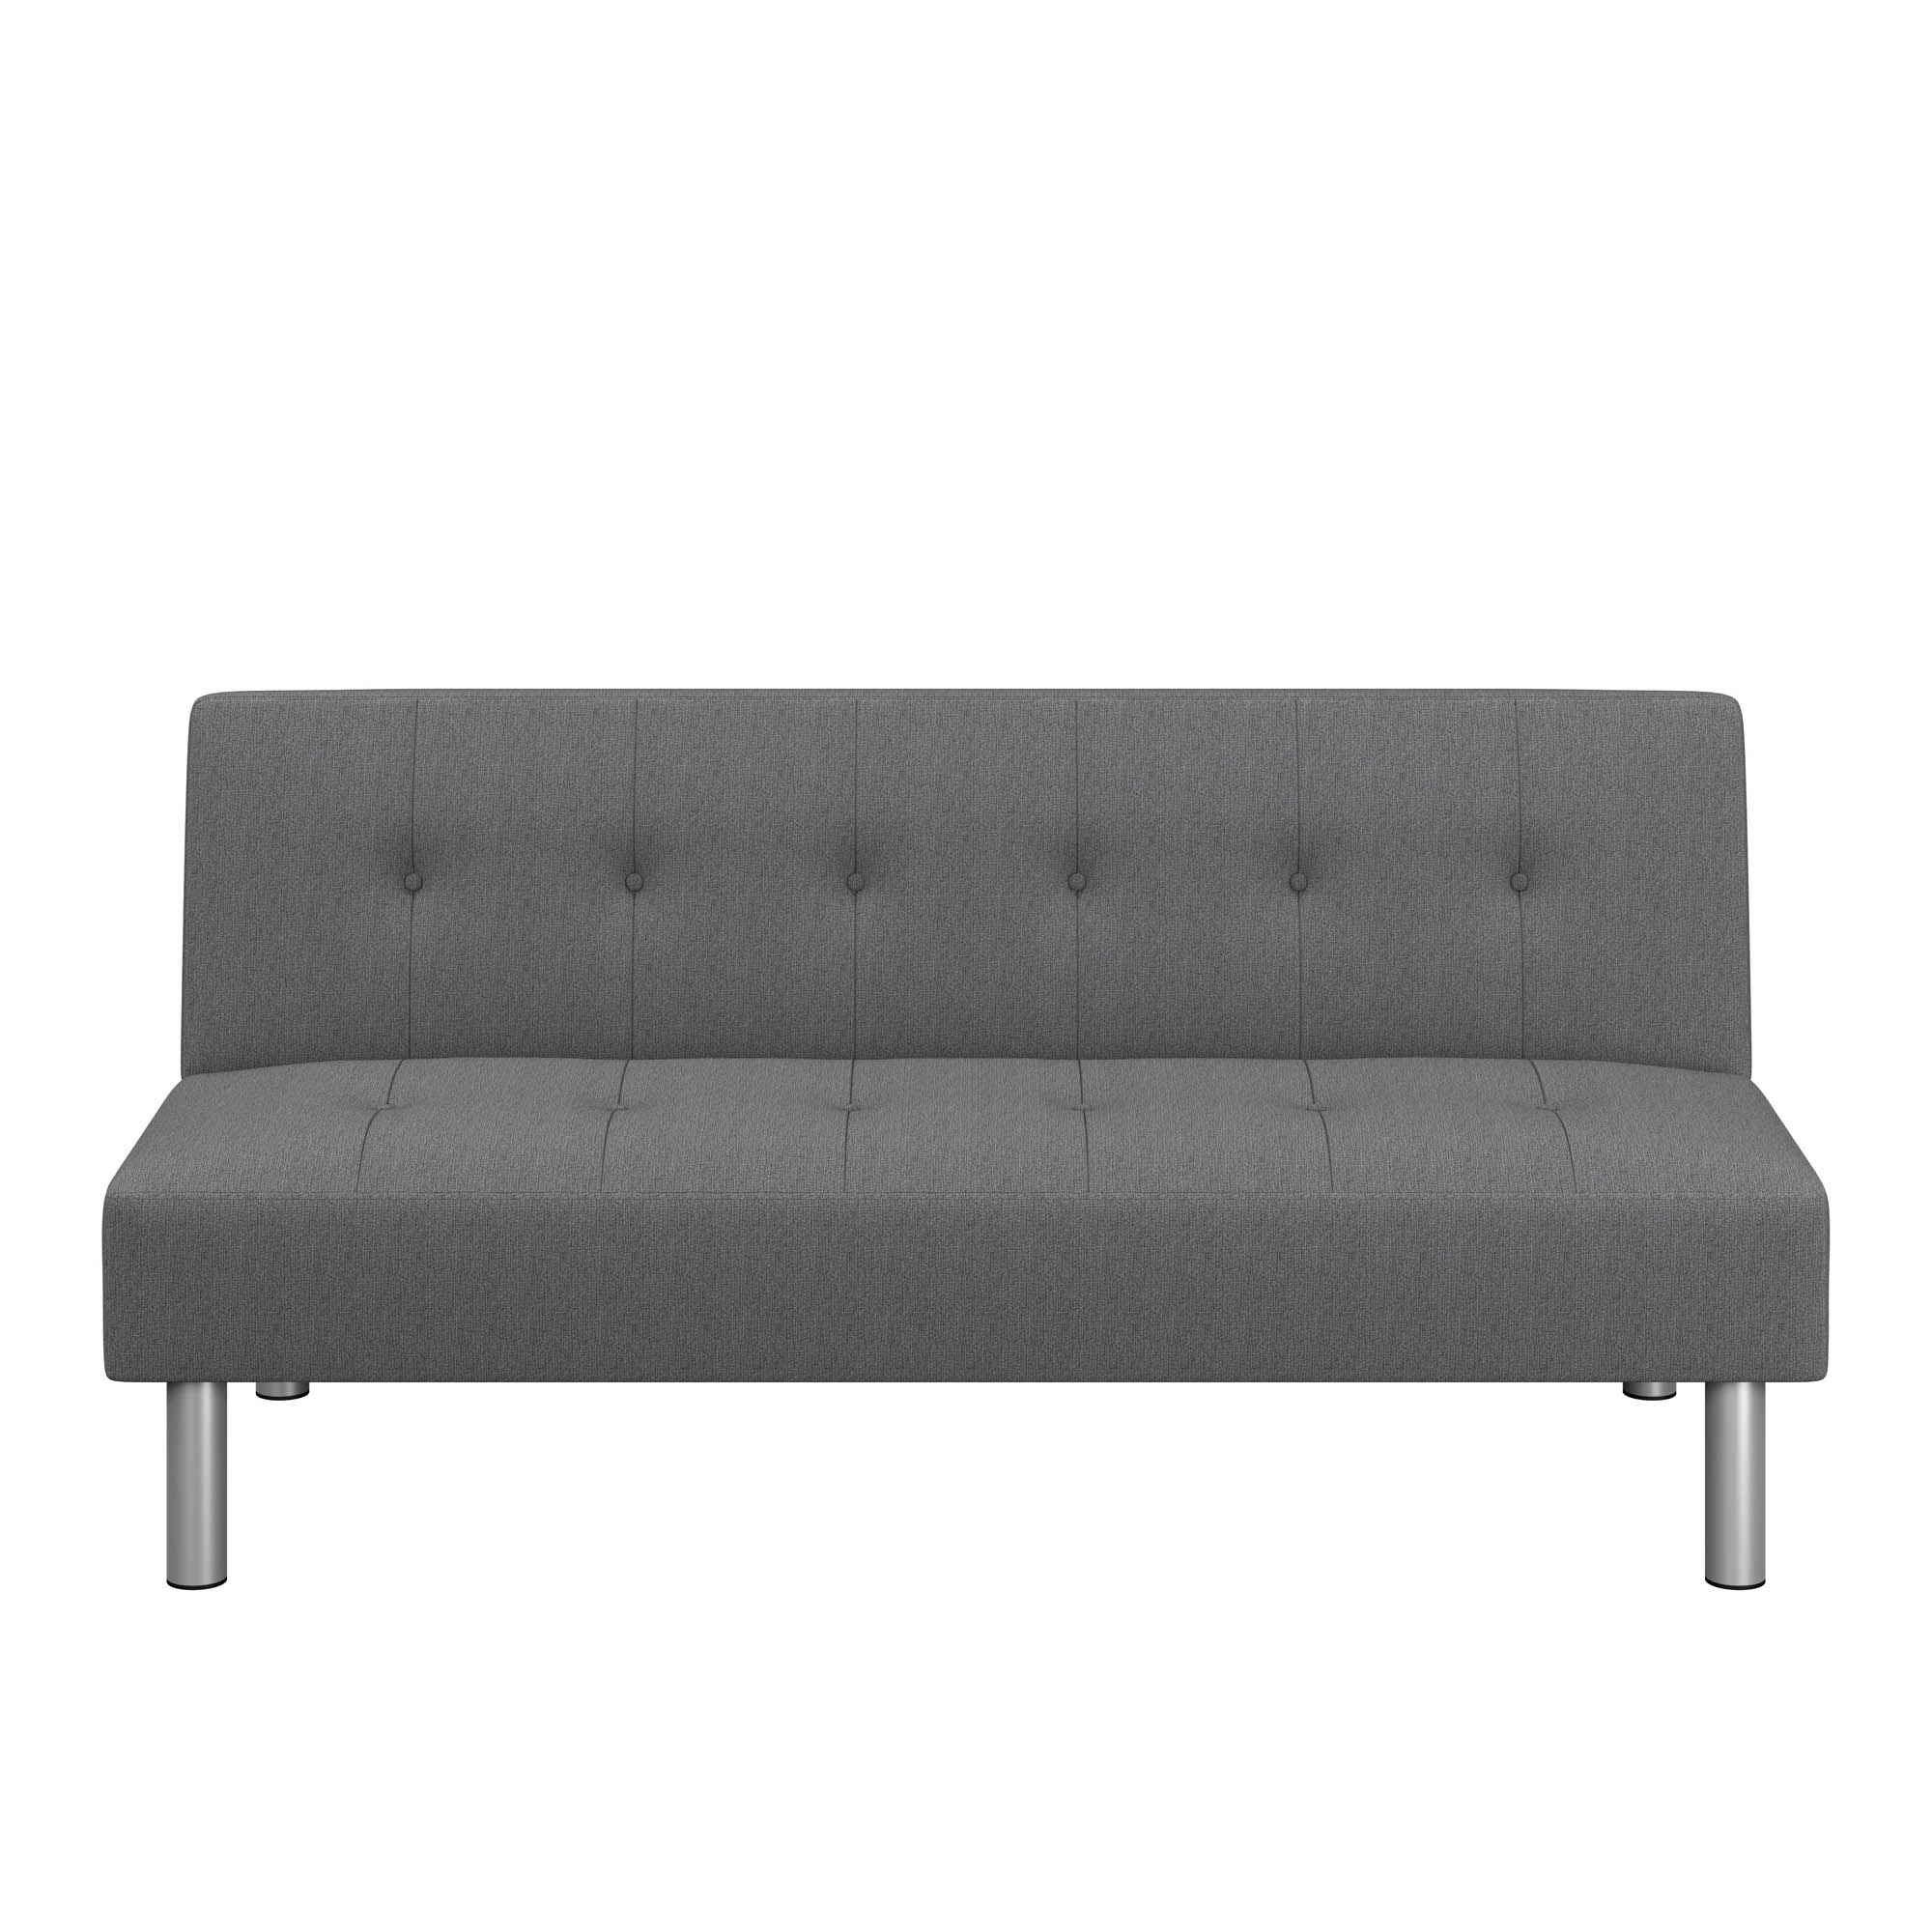 Serta Canon Futon with Power, Charcoal Gray Fabric - image 4 of 14